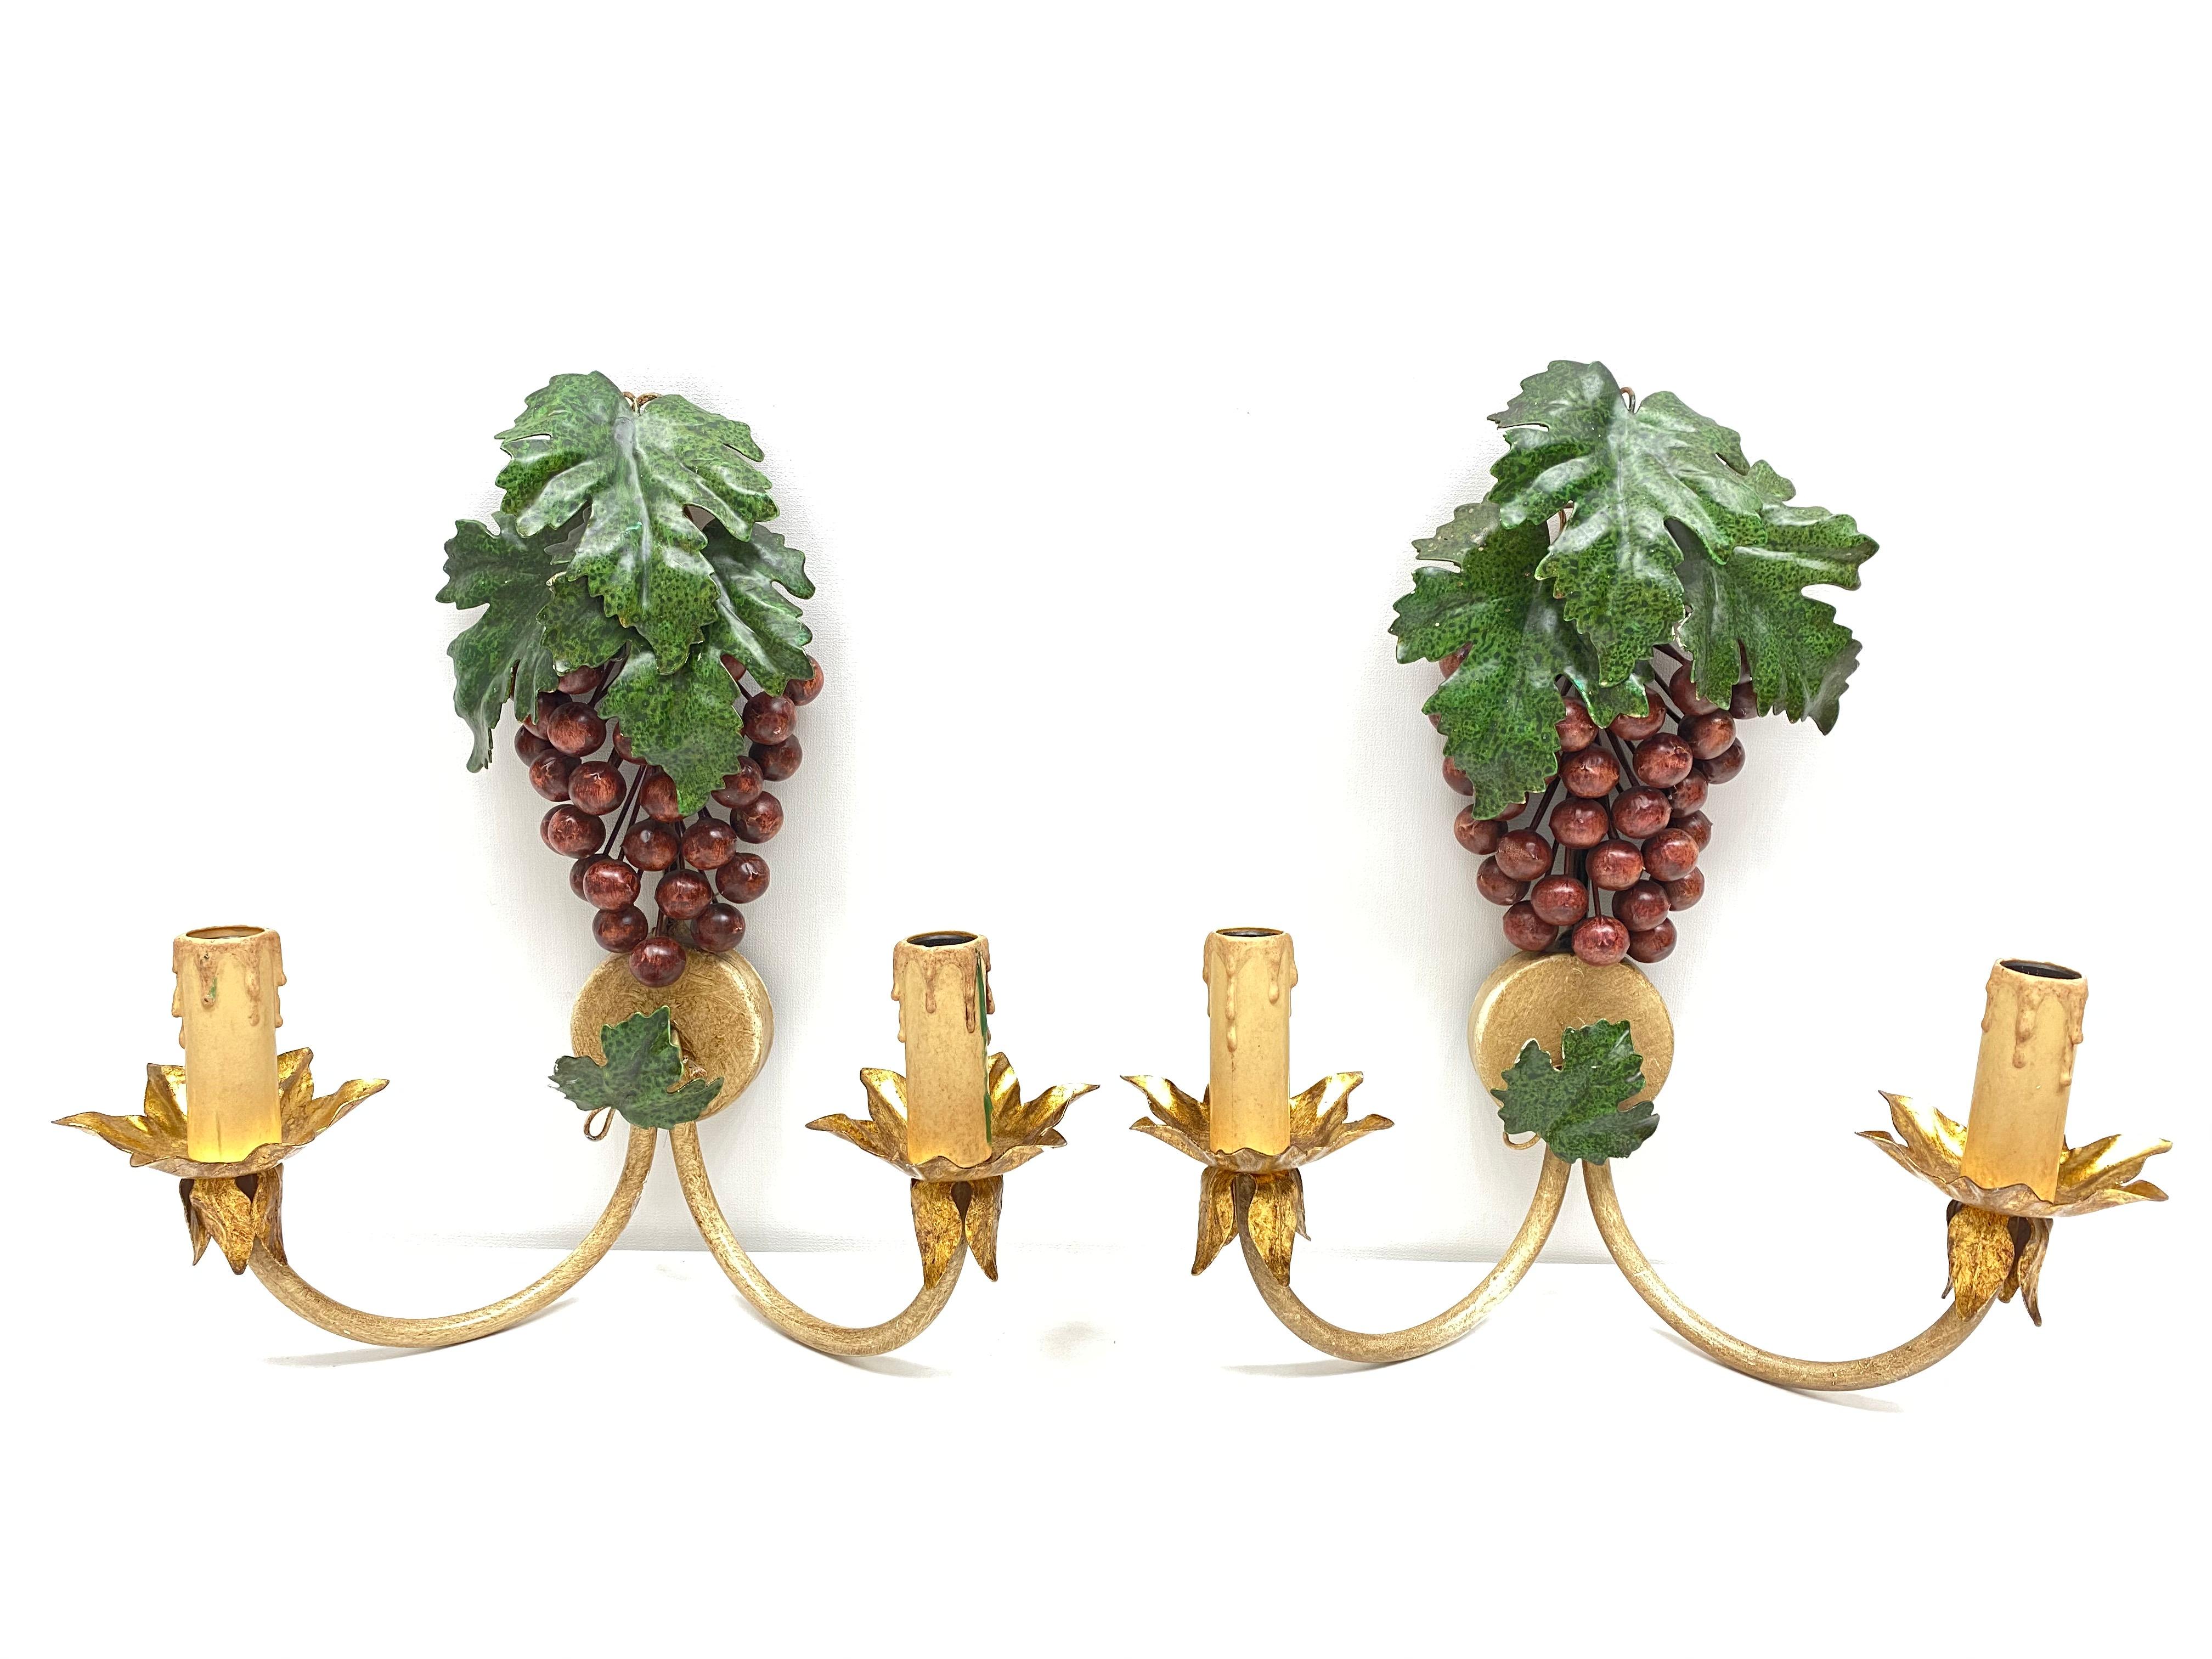 A pair Hollywood Regency midcentury grape and leaf florentine sconces, each fixture requires two European E14 candelabra bulbs, each up to 40 watts. The wall lights have a beautiful patina and give each room a eclectic statement.